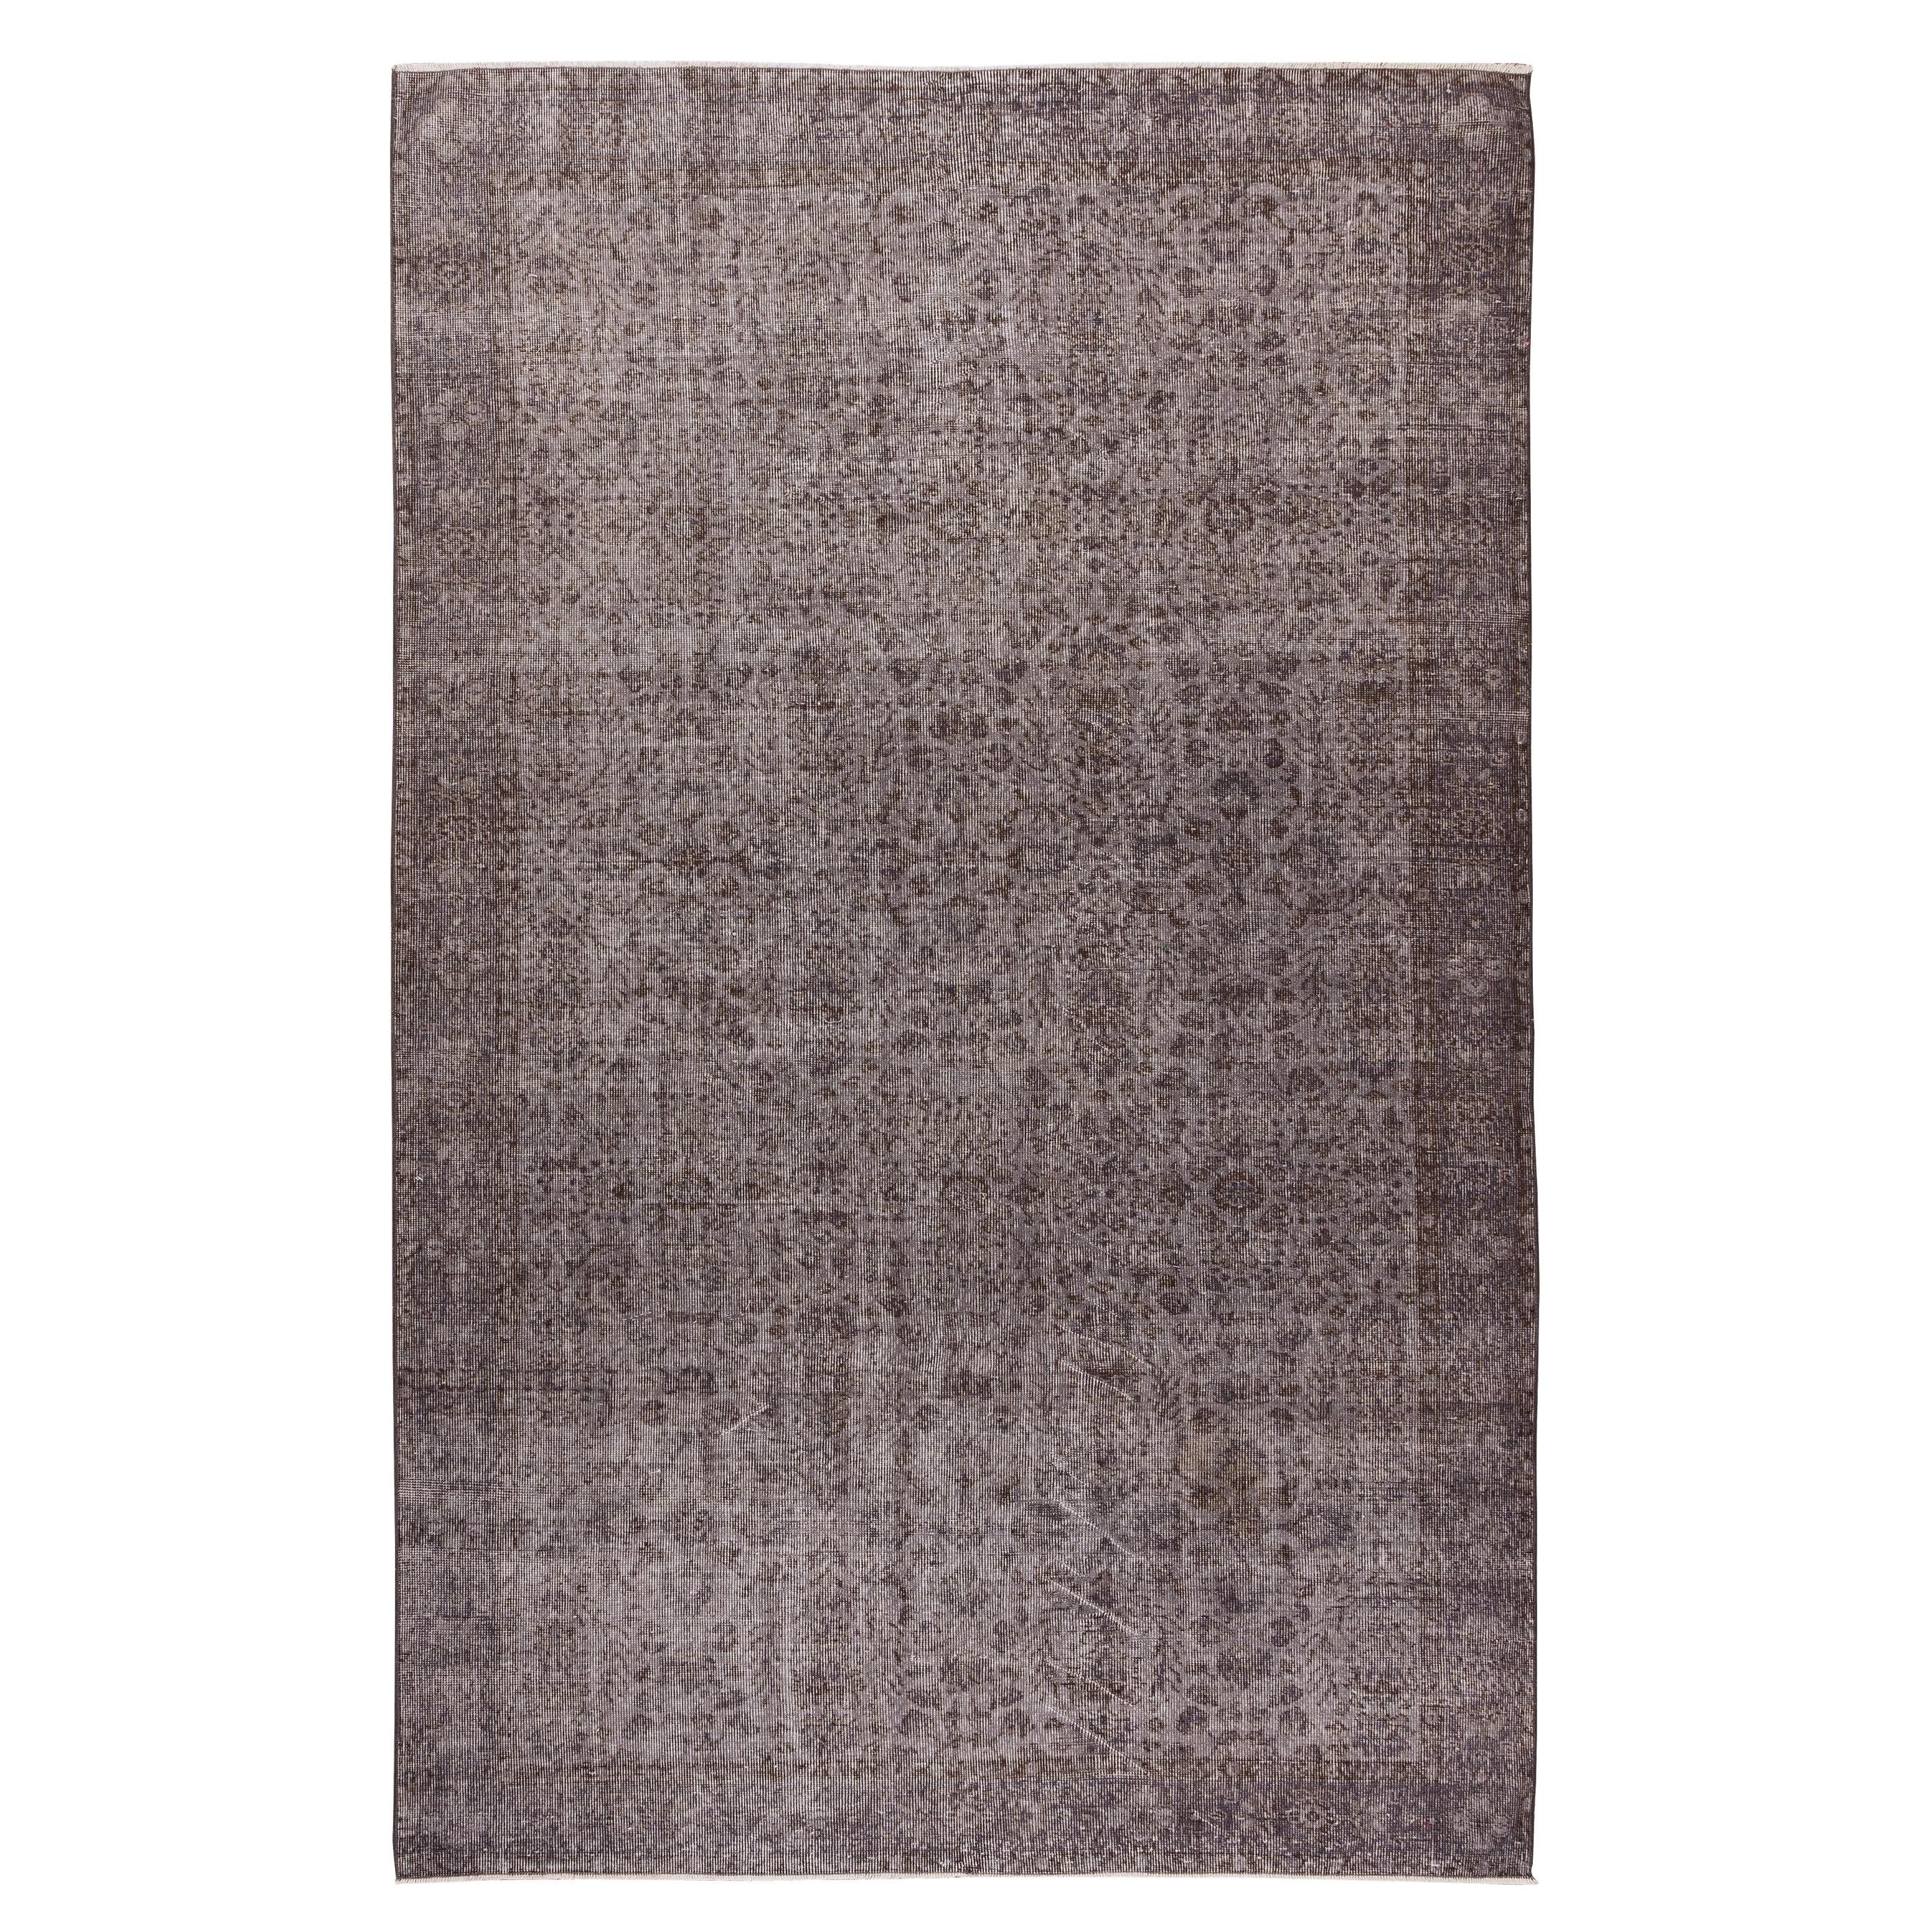 6.7x10.2 Ft Gray Over-Dyed Rug, Vintage Floral Hand-Knotted Turkish Wool Carpet For Sale